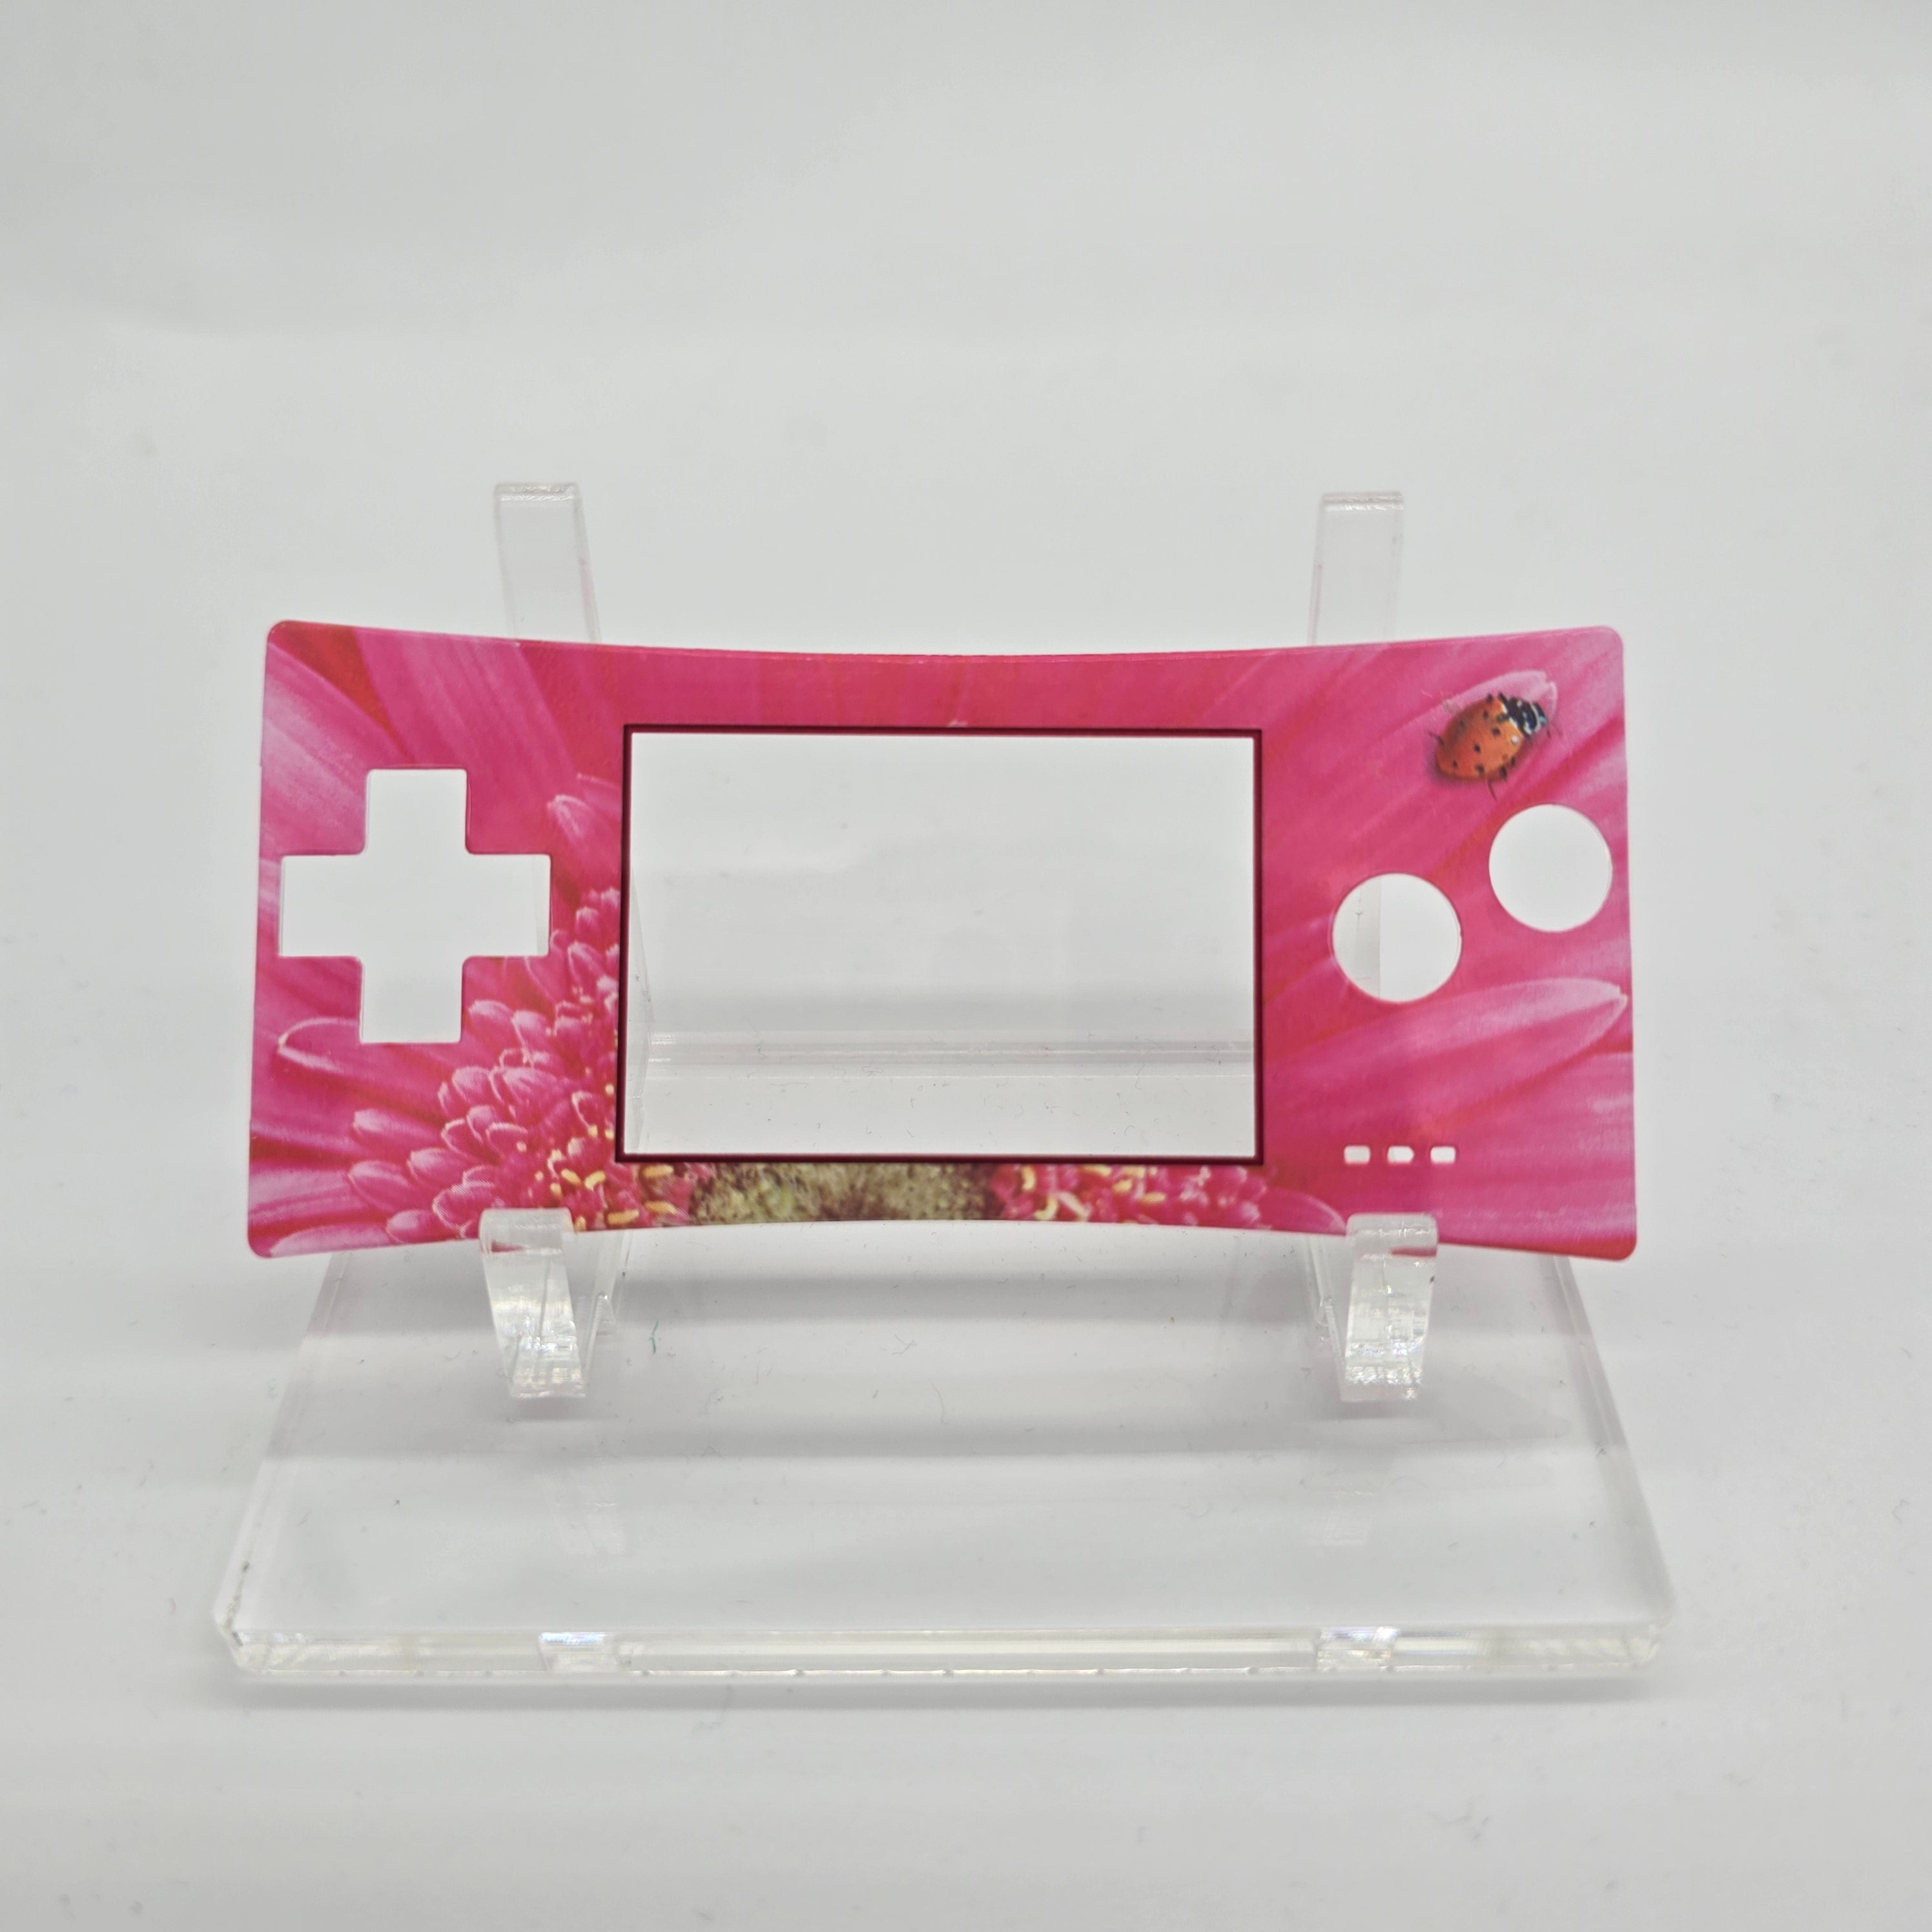 Game Boy Micro Official Nintendo Pink Faceplate